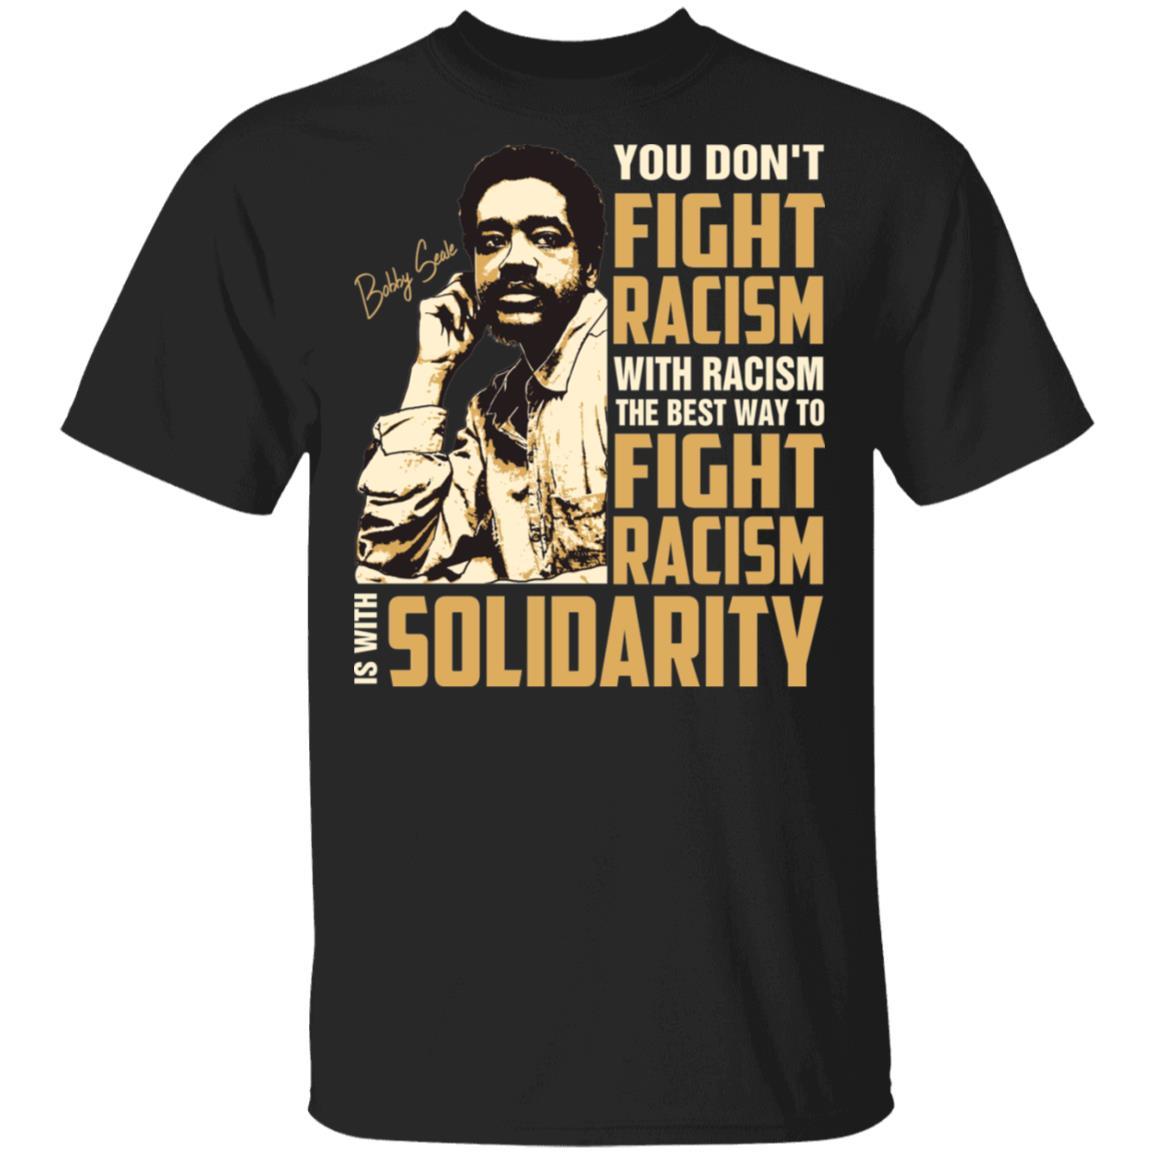 You Dont Fight Racism With Racism The Best To Fight Racism Is With Solidarity Apparel CustomCat Uniex Tee Black S